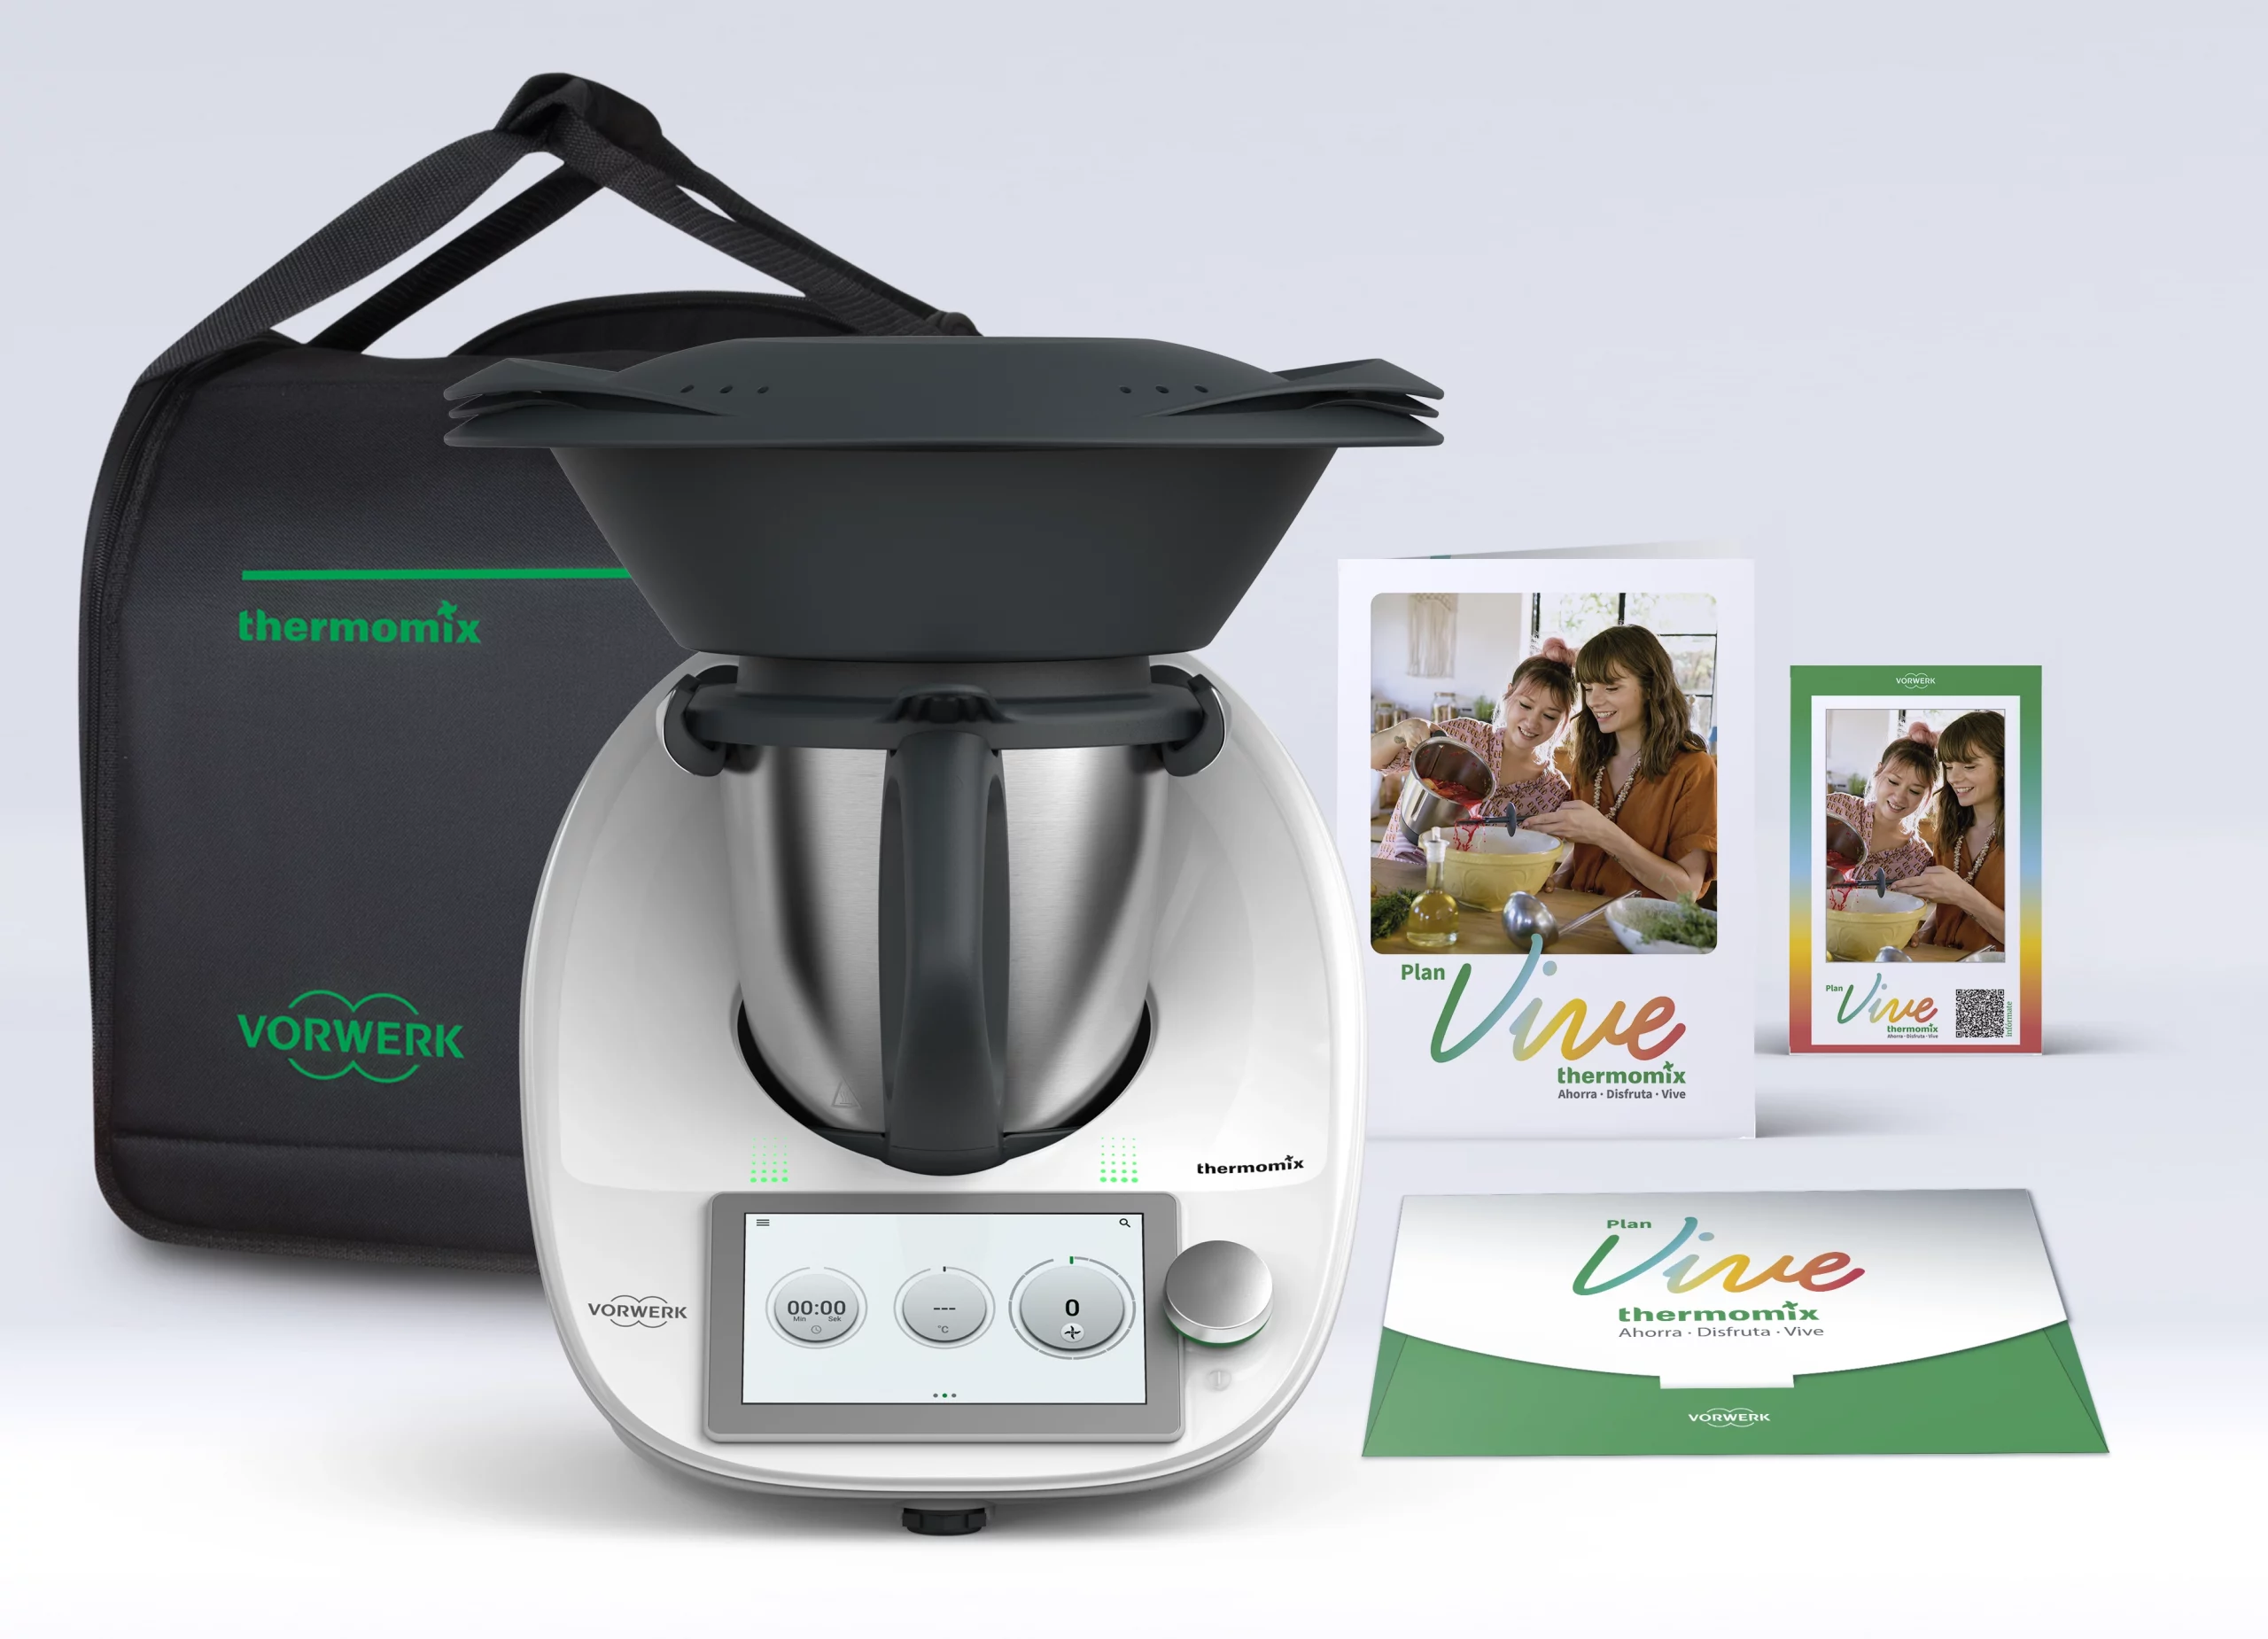 Cabecera Vive Thermomix